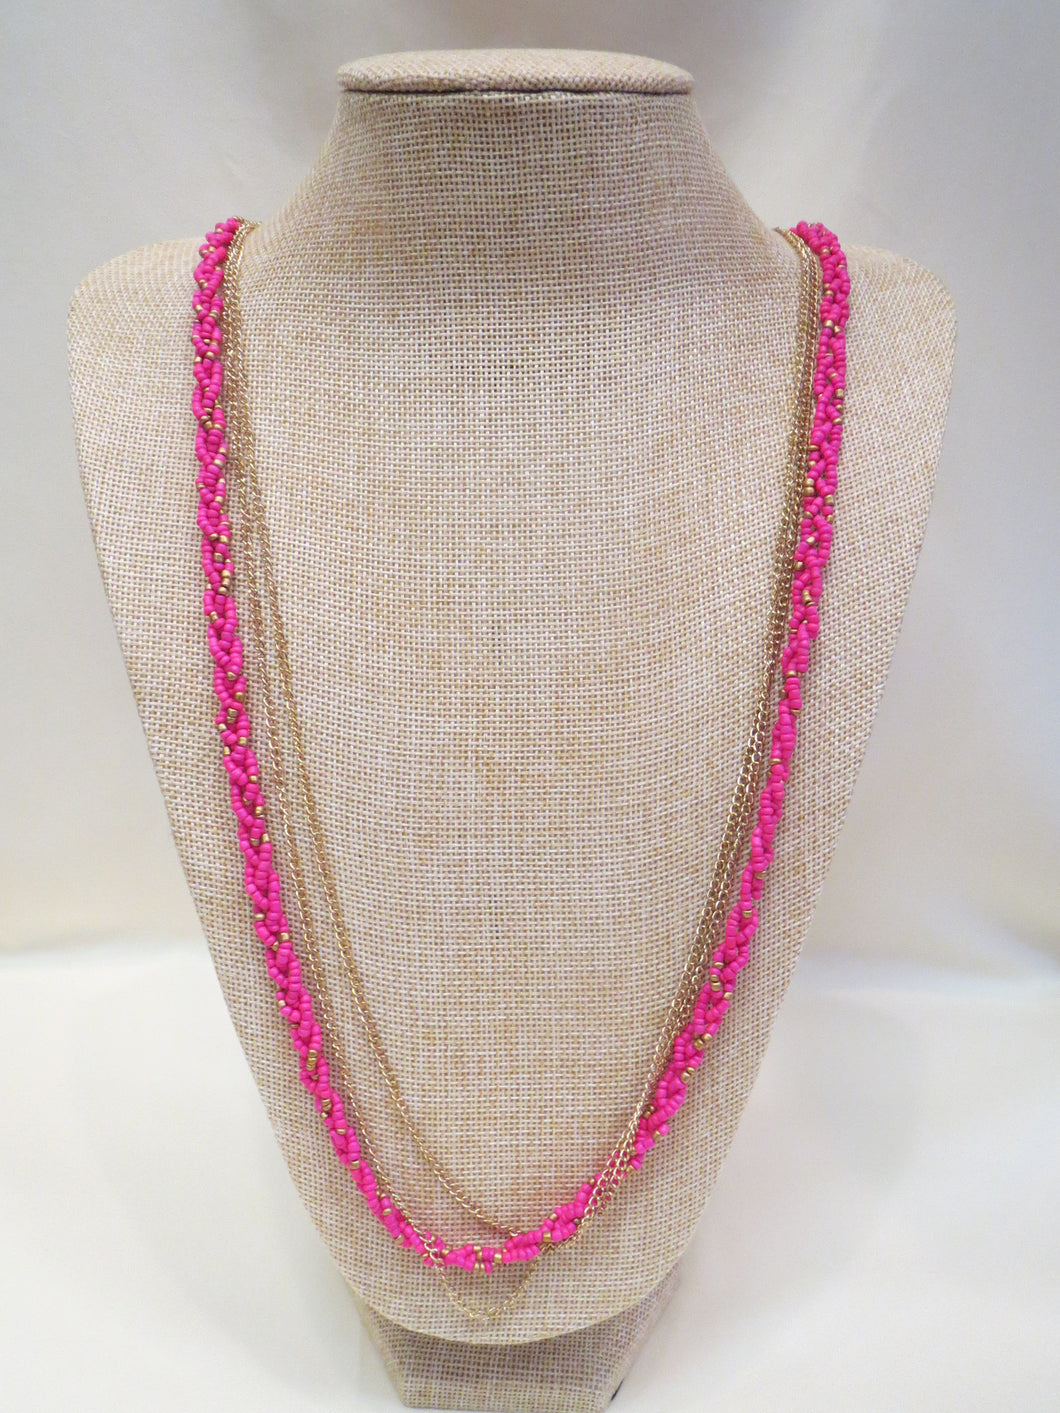 ADO Pink Beads & Gold Chain Necklace | All Dec'd Out